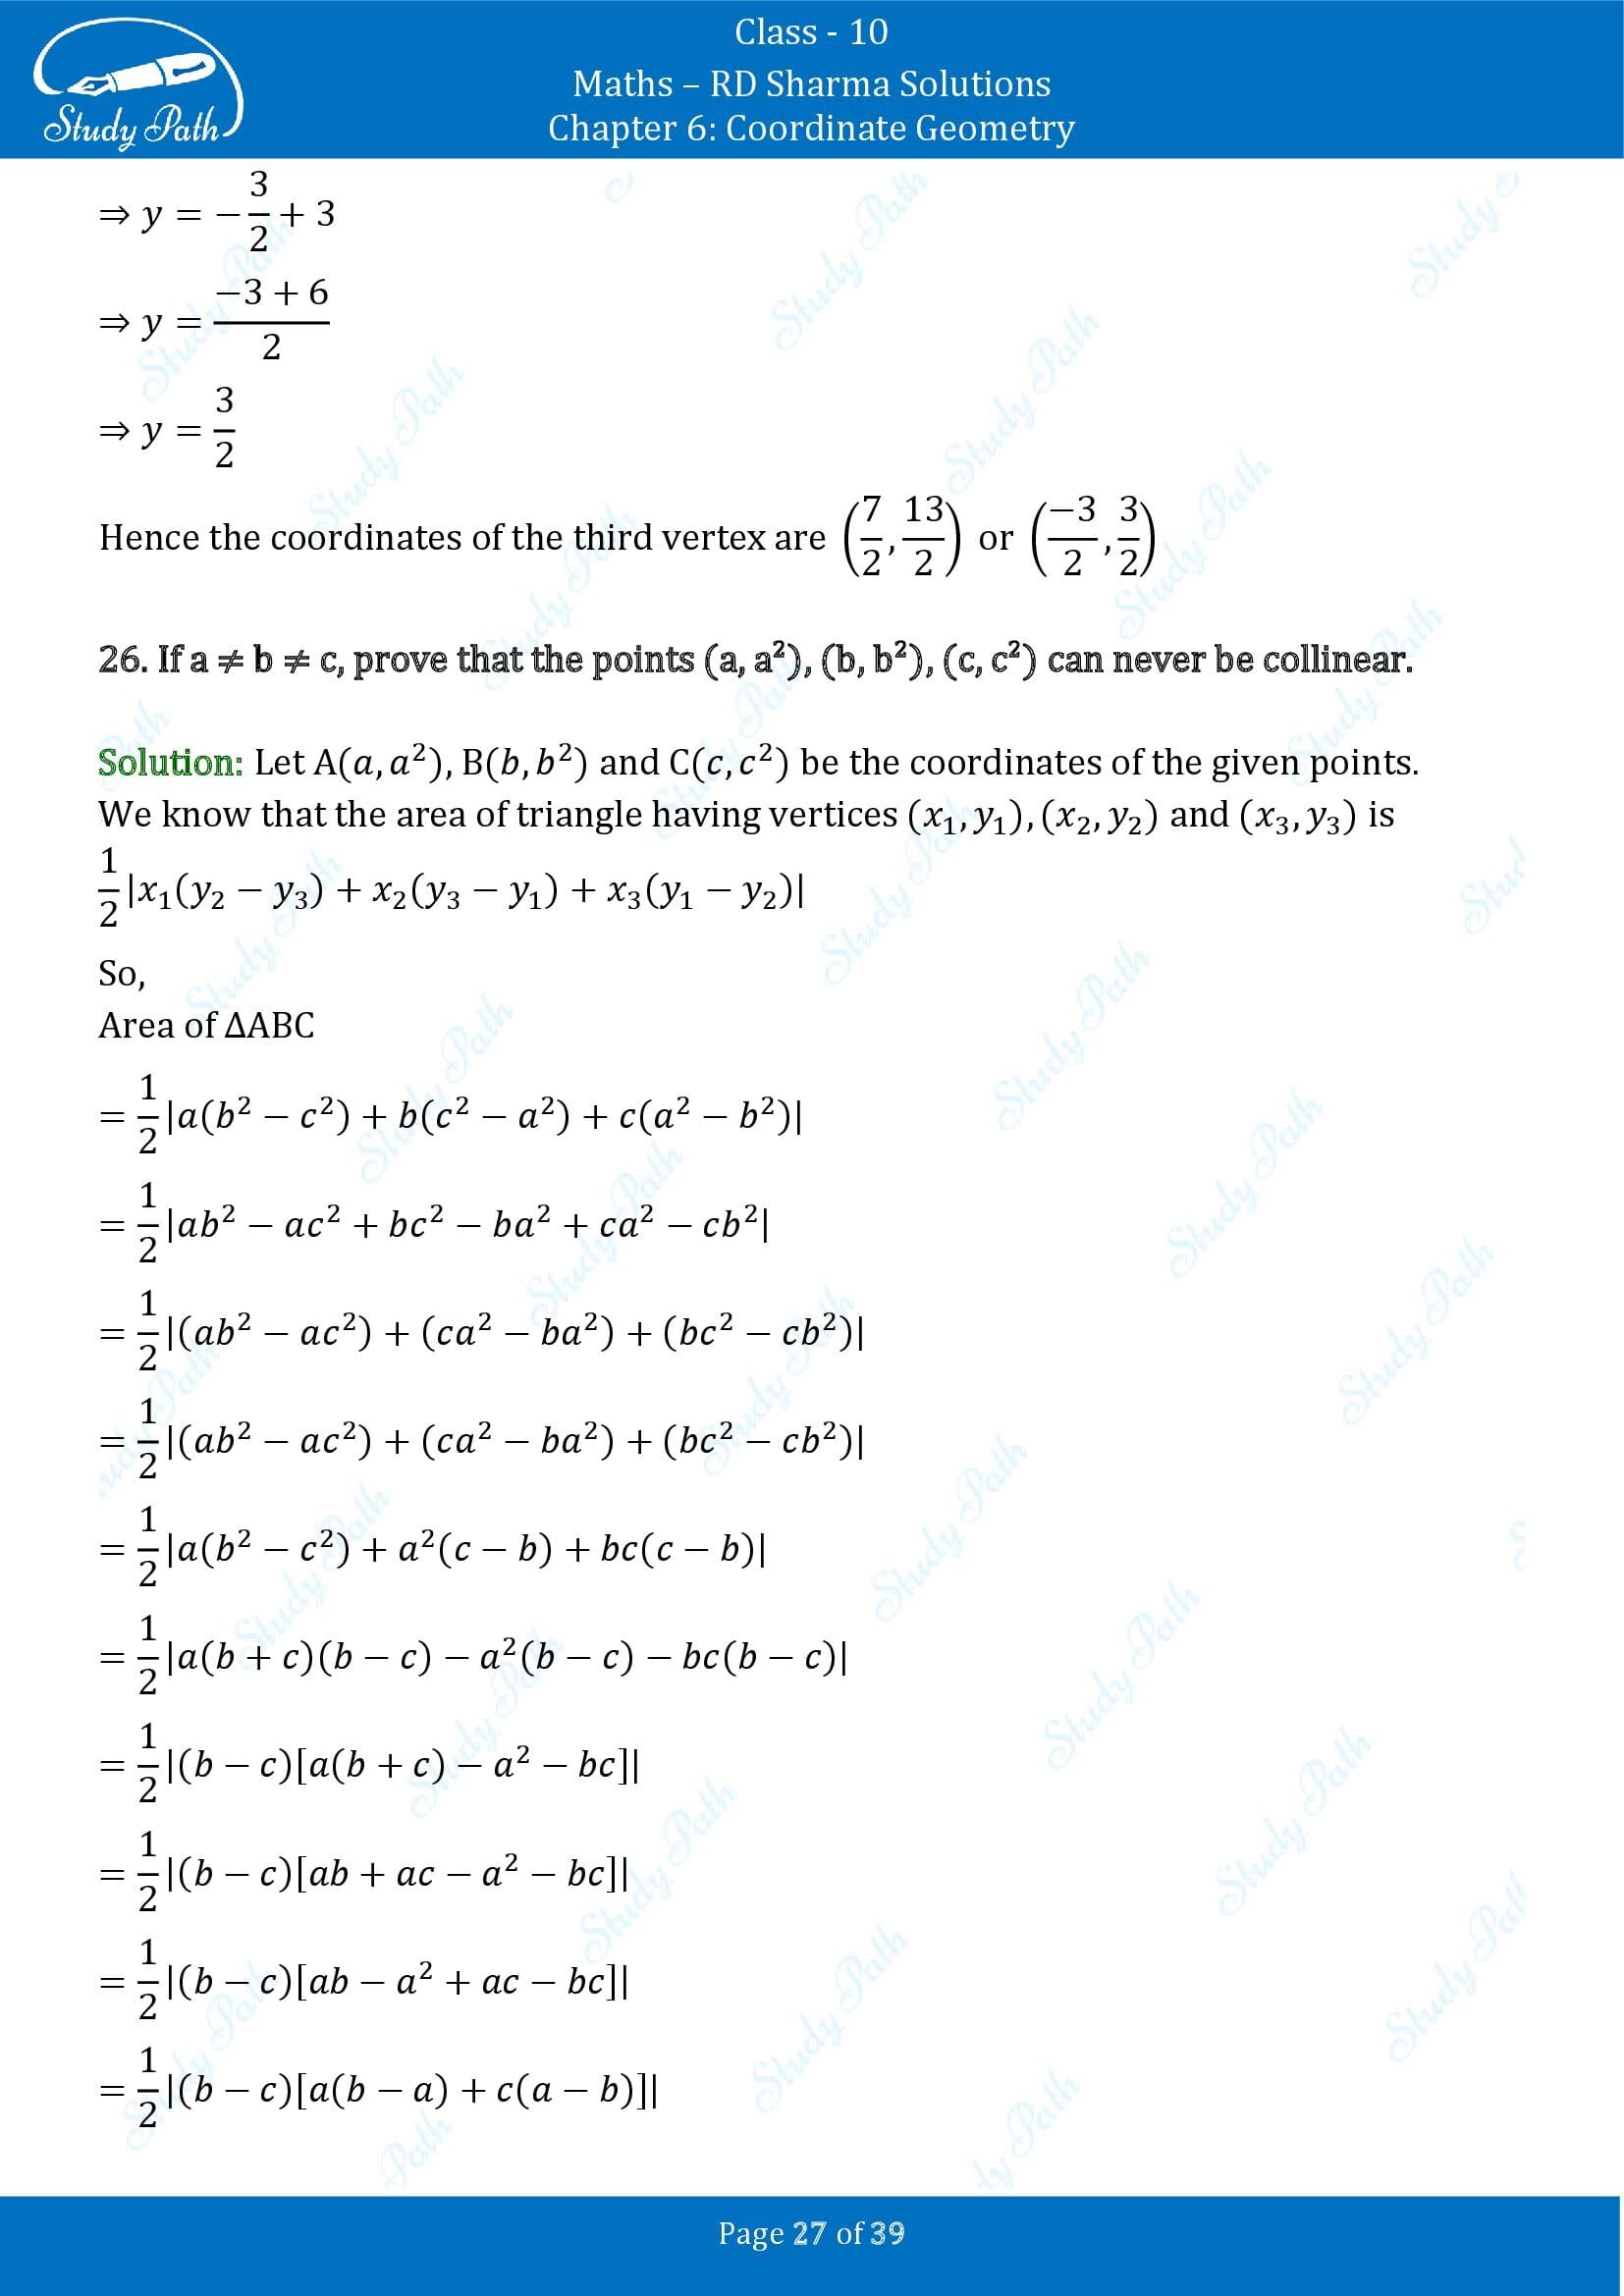 RD Sharma Solutions Class 10 Chapter 6 Coordinate Geometry Exercise 6.5 0027